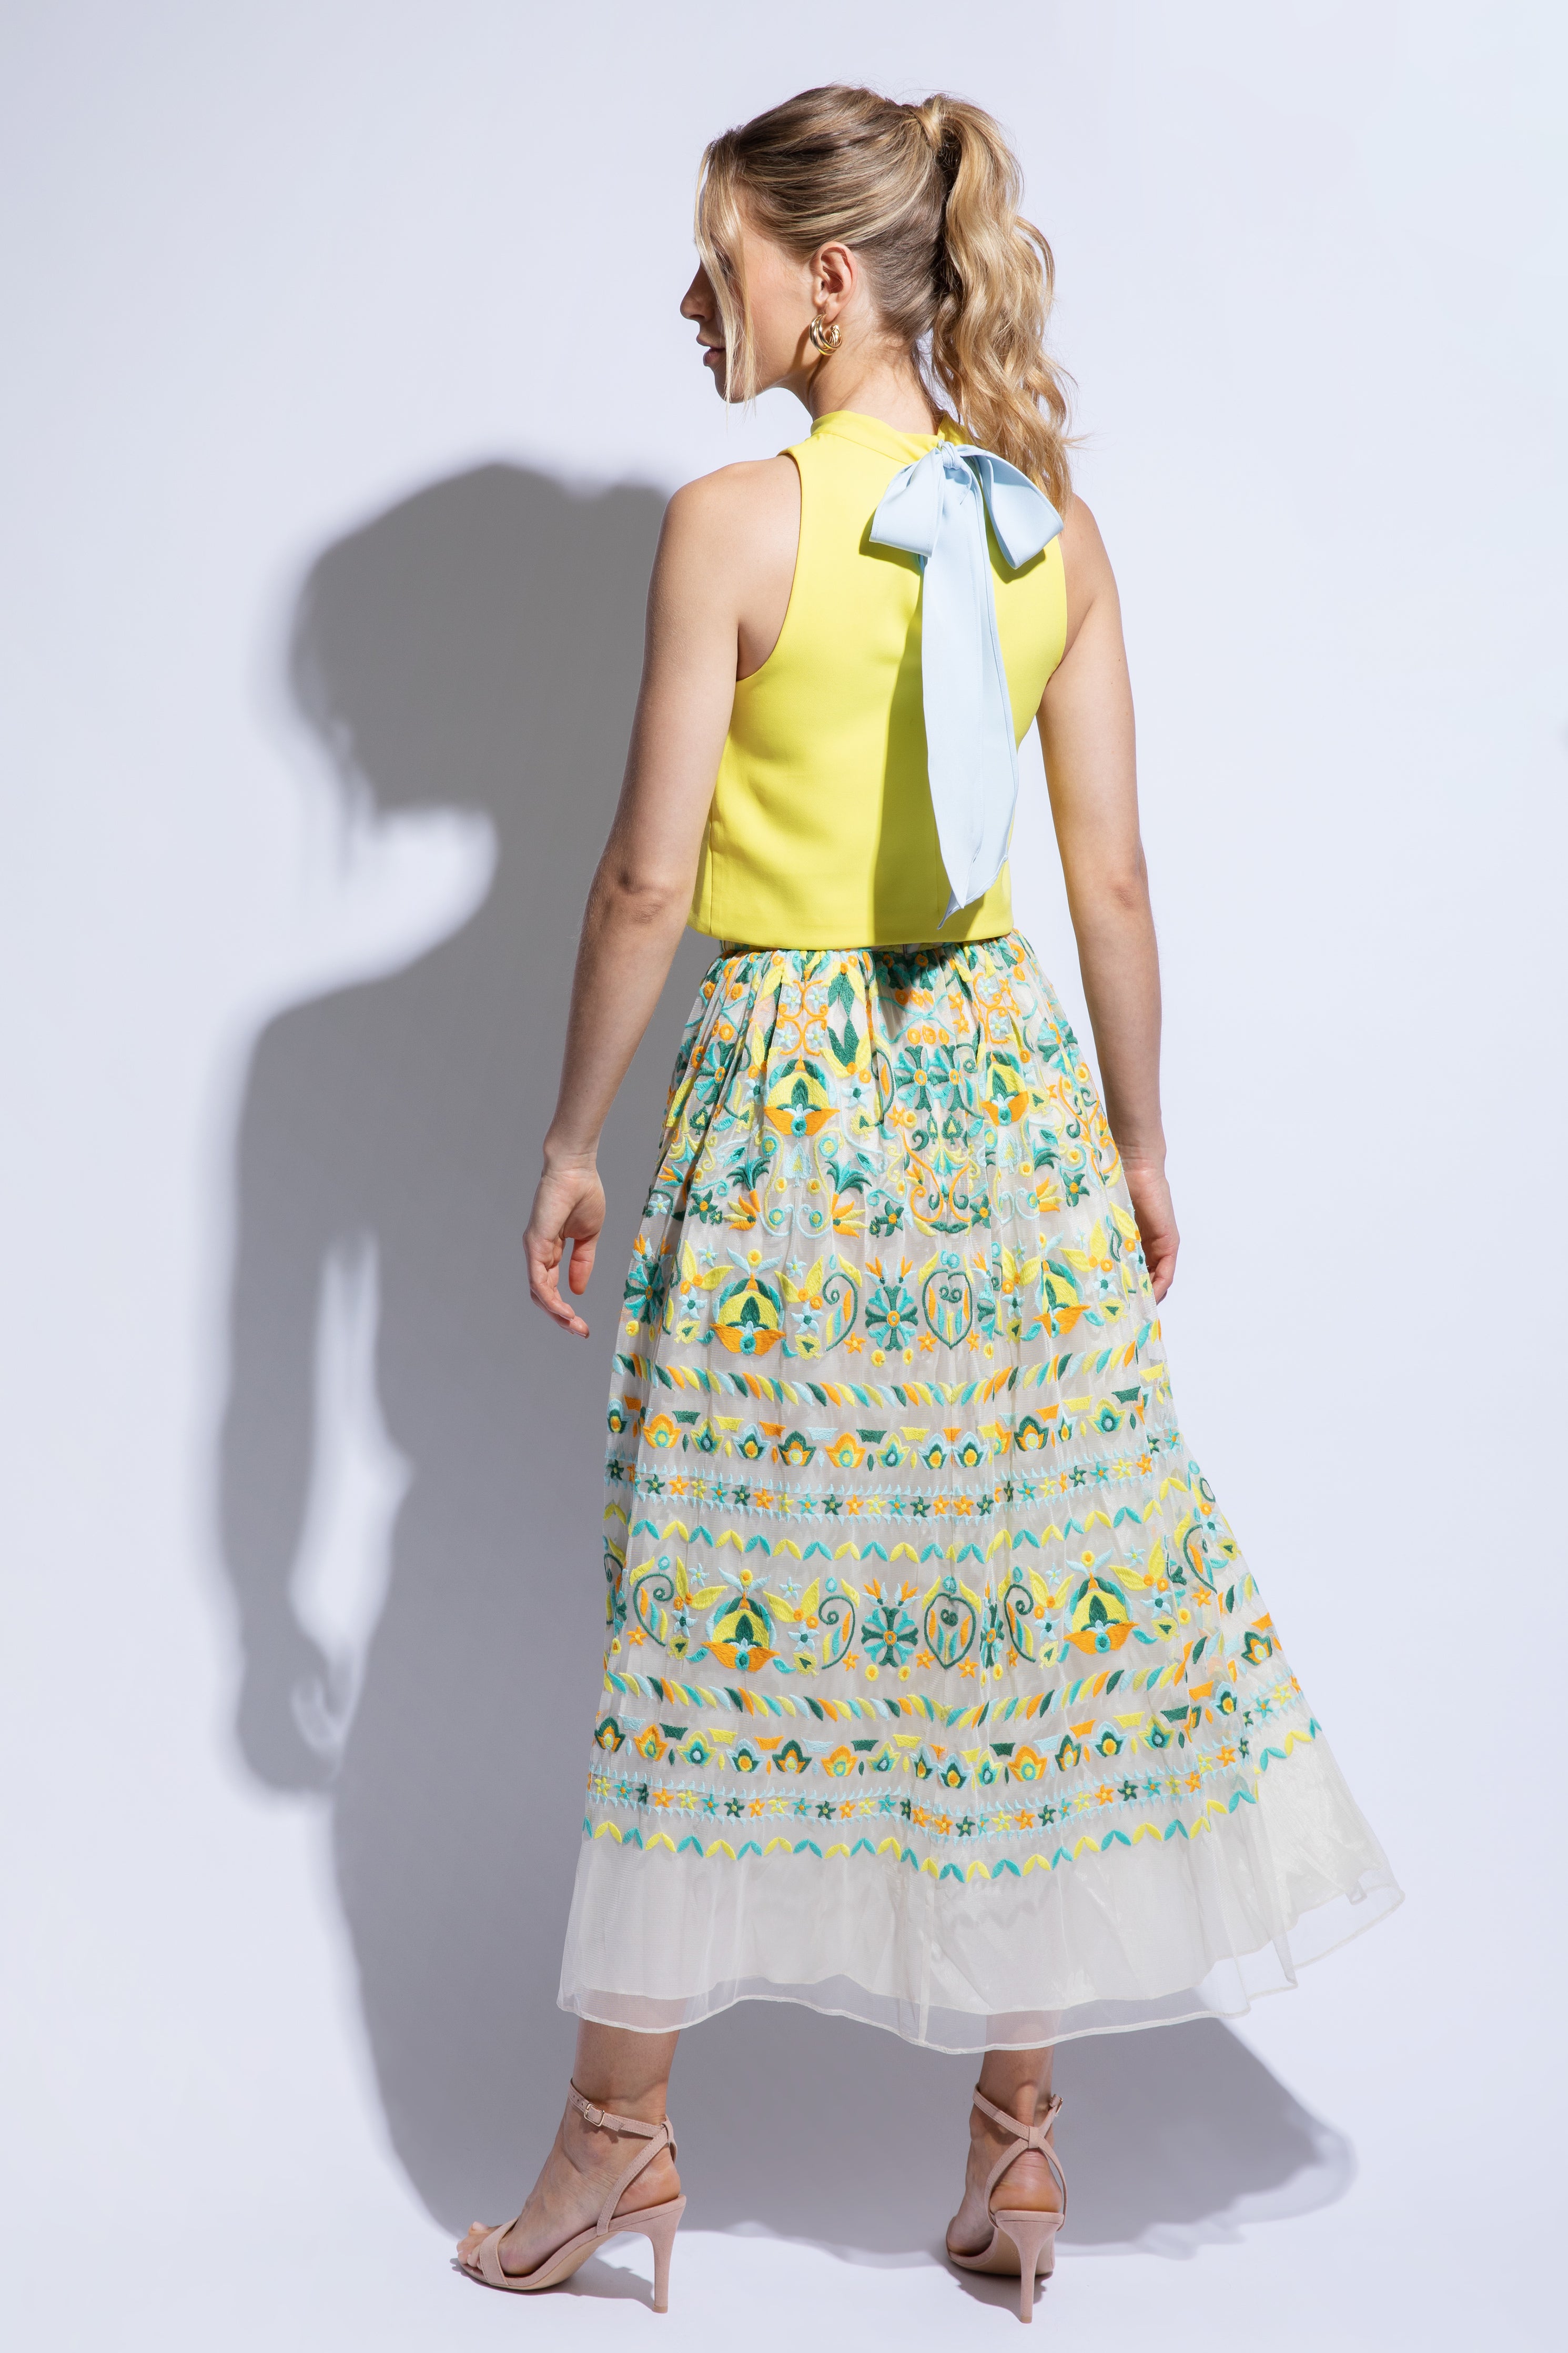 Back view of colourful embroidered tulle skirt with yellow sleeveless top and bow detail